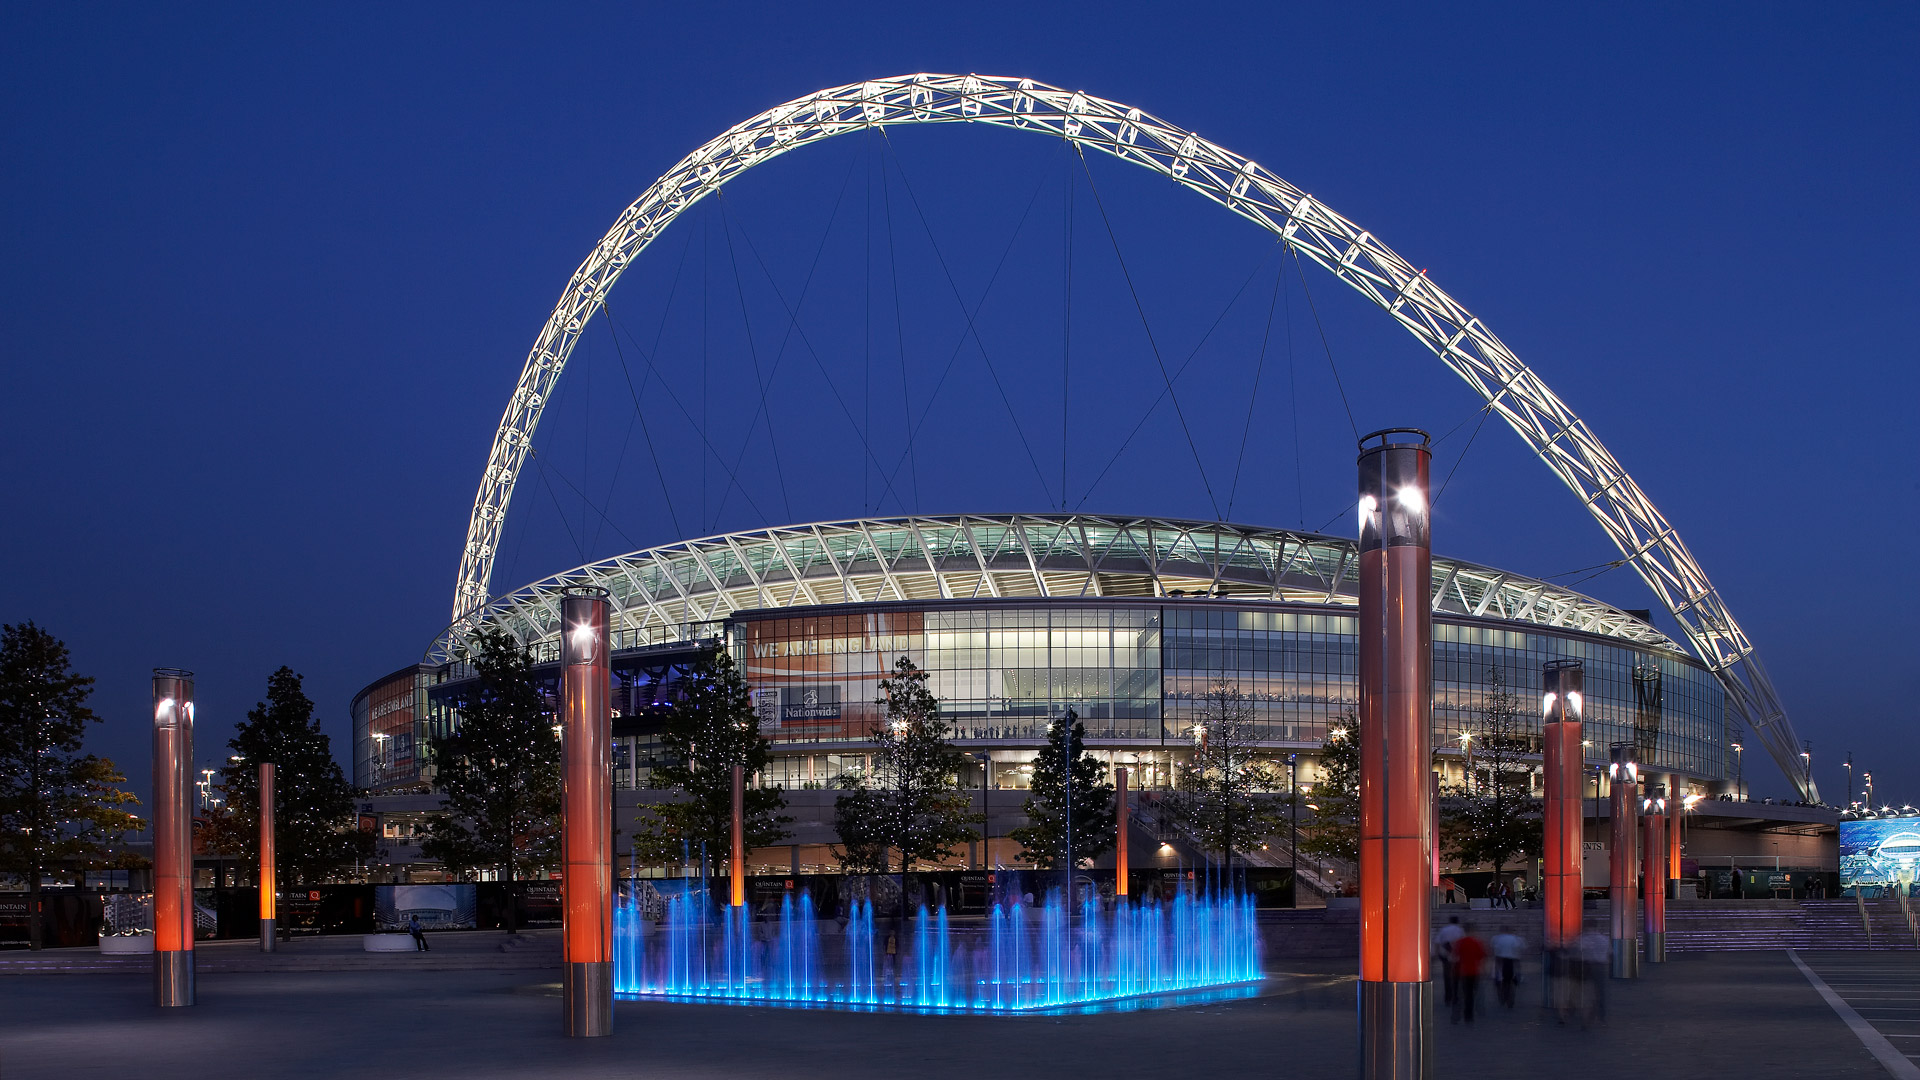 Wembley's arch will only be lit for football and entertainment under a new rule backed by the Football Association board.